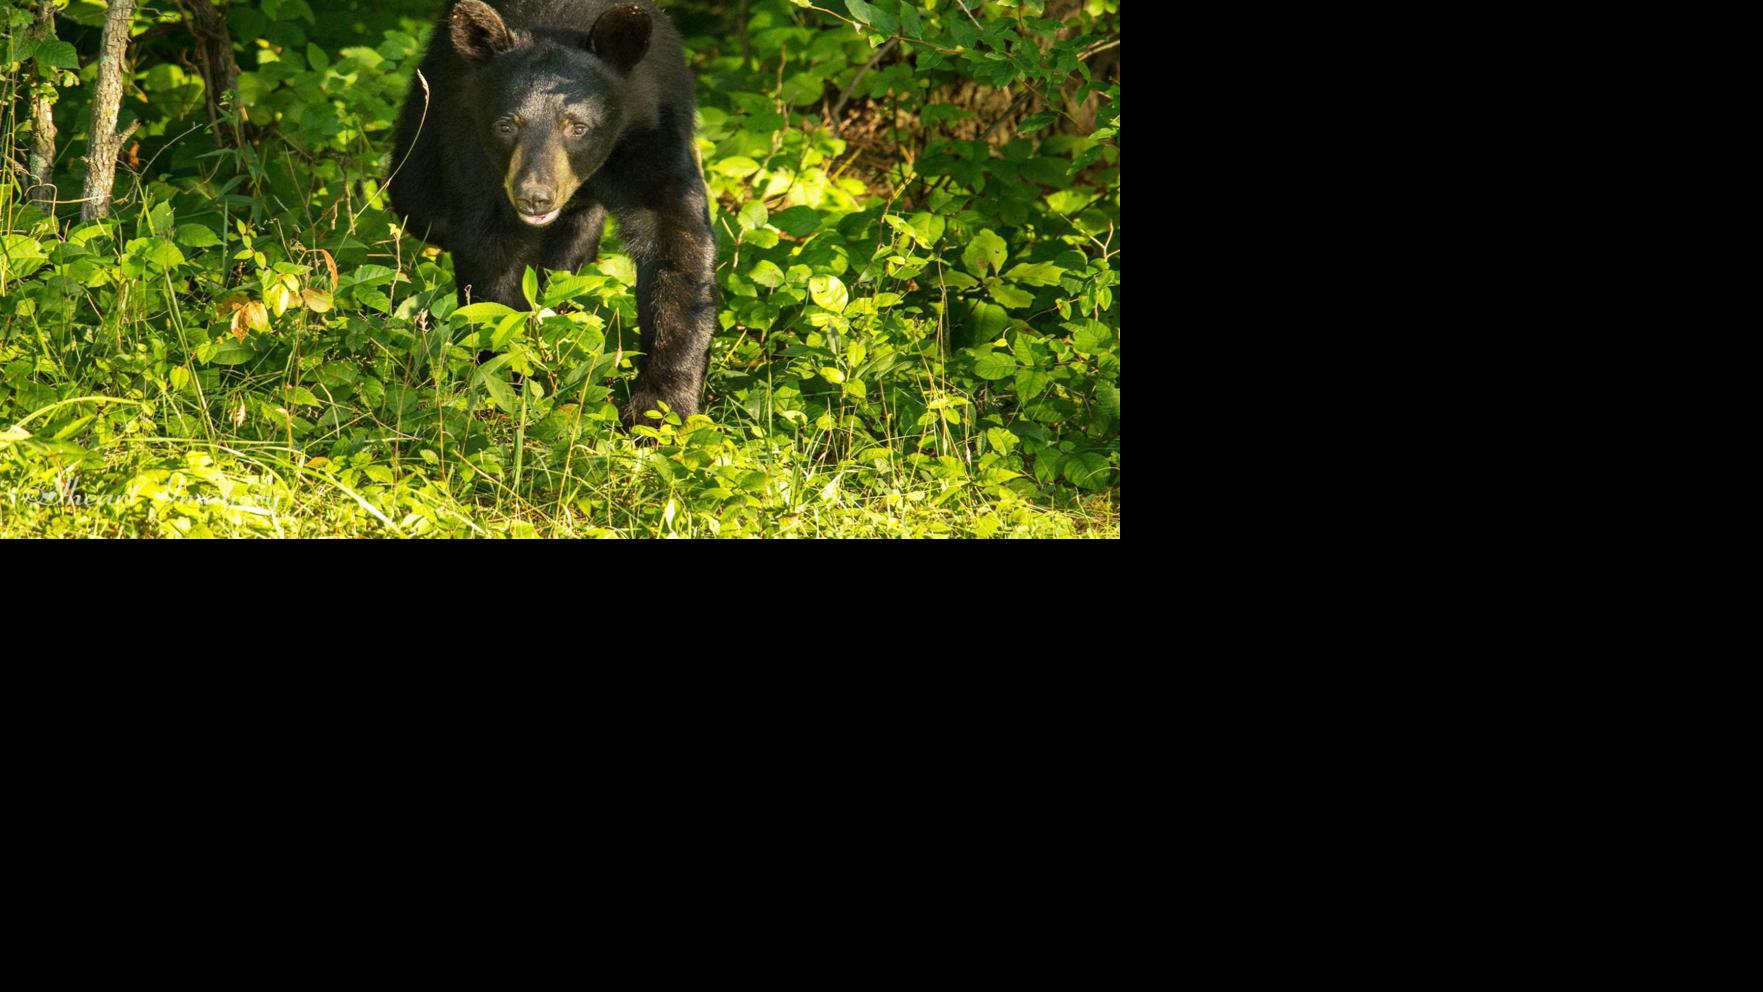 Black bear sightings reported in southern Ohio counties Spotlight